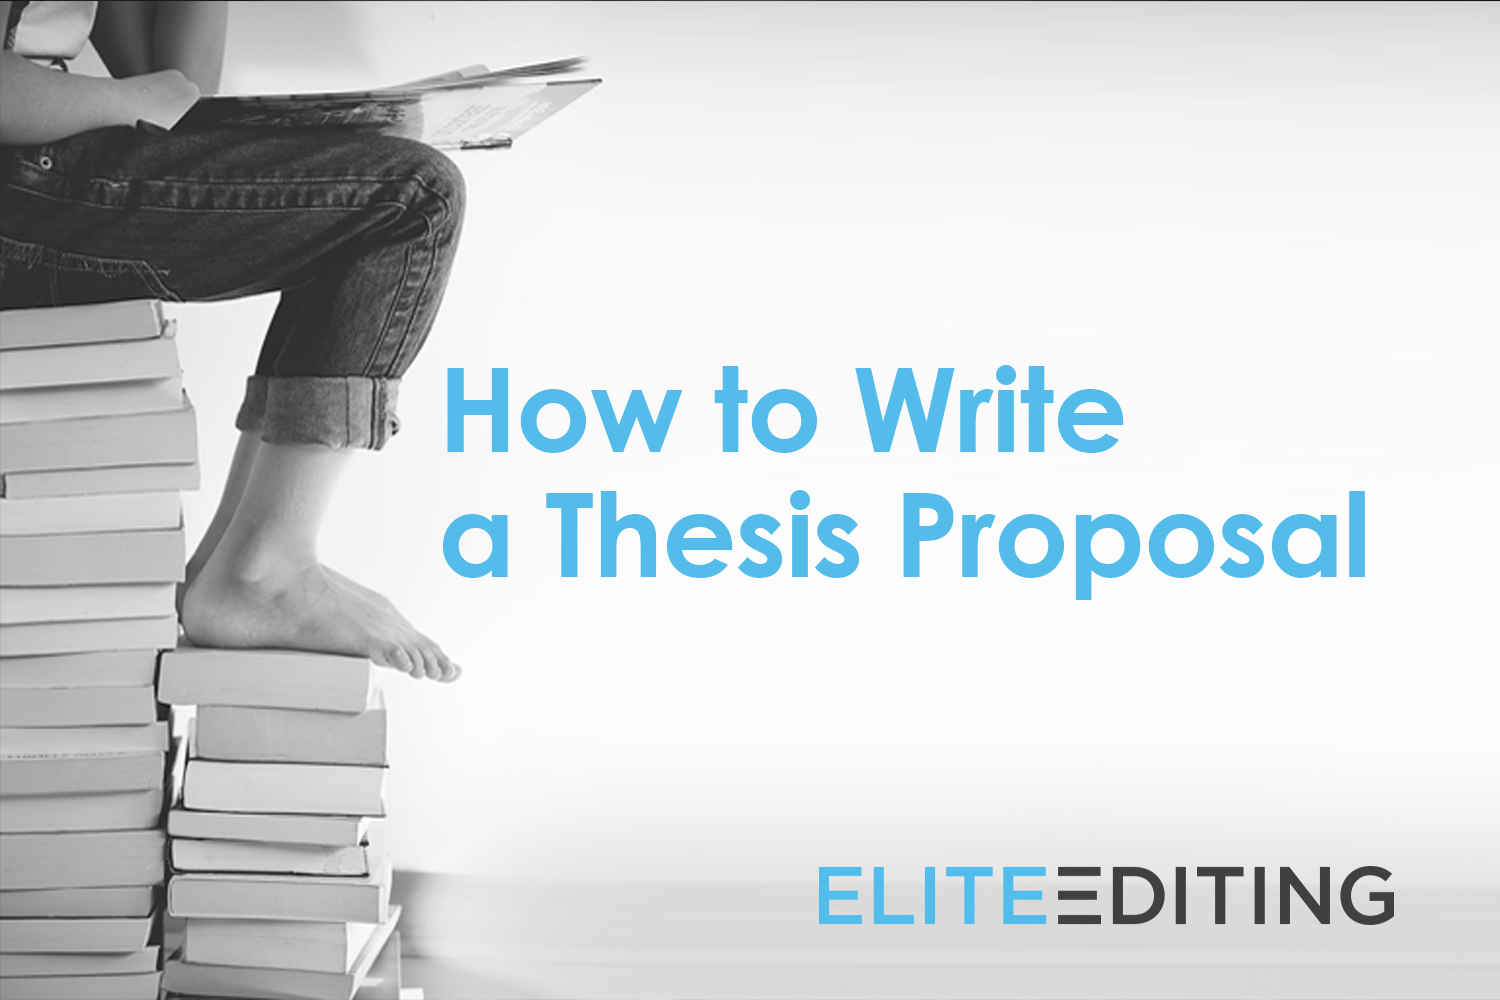 How to Write a Thesis Proposal - Elite Editing